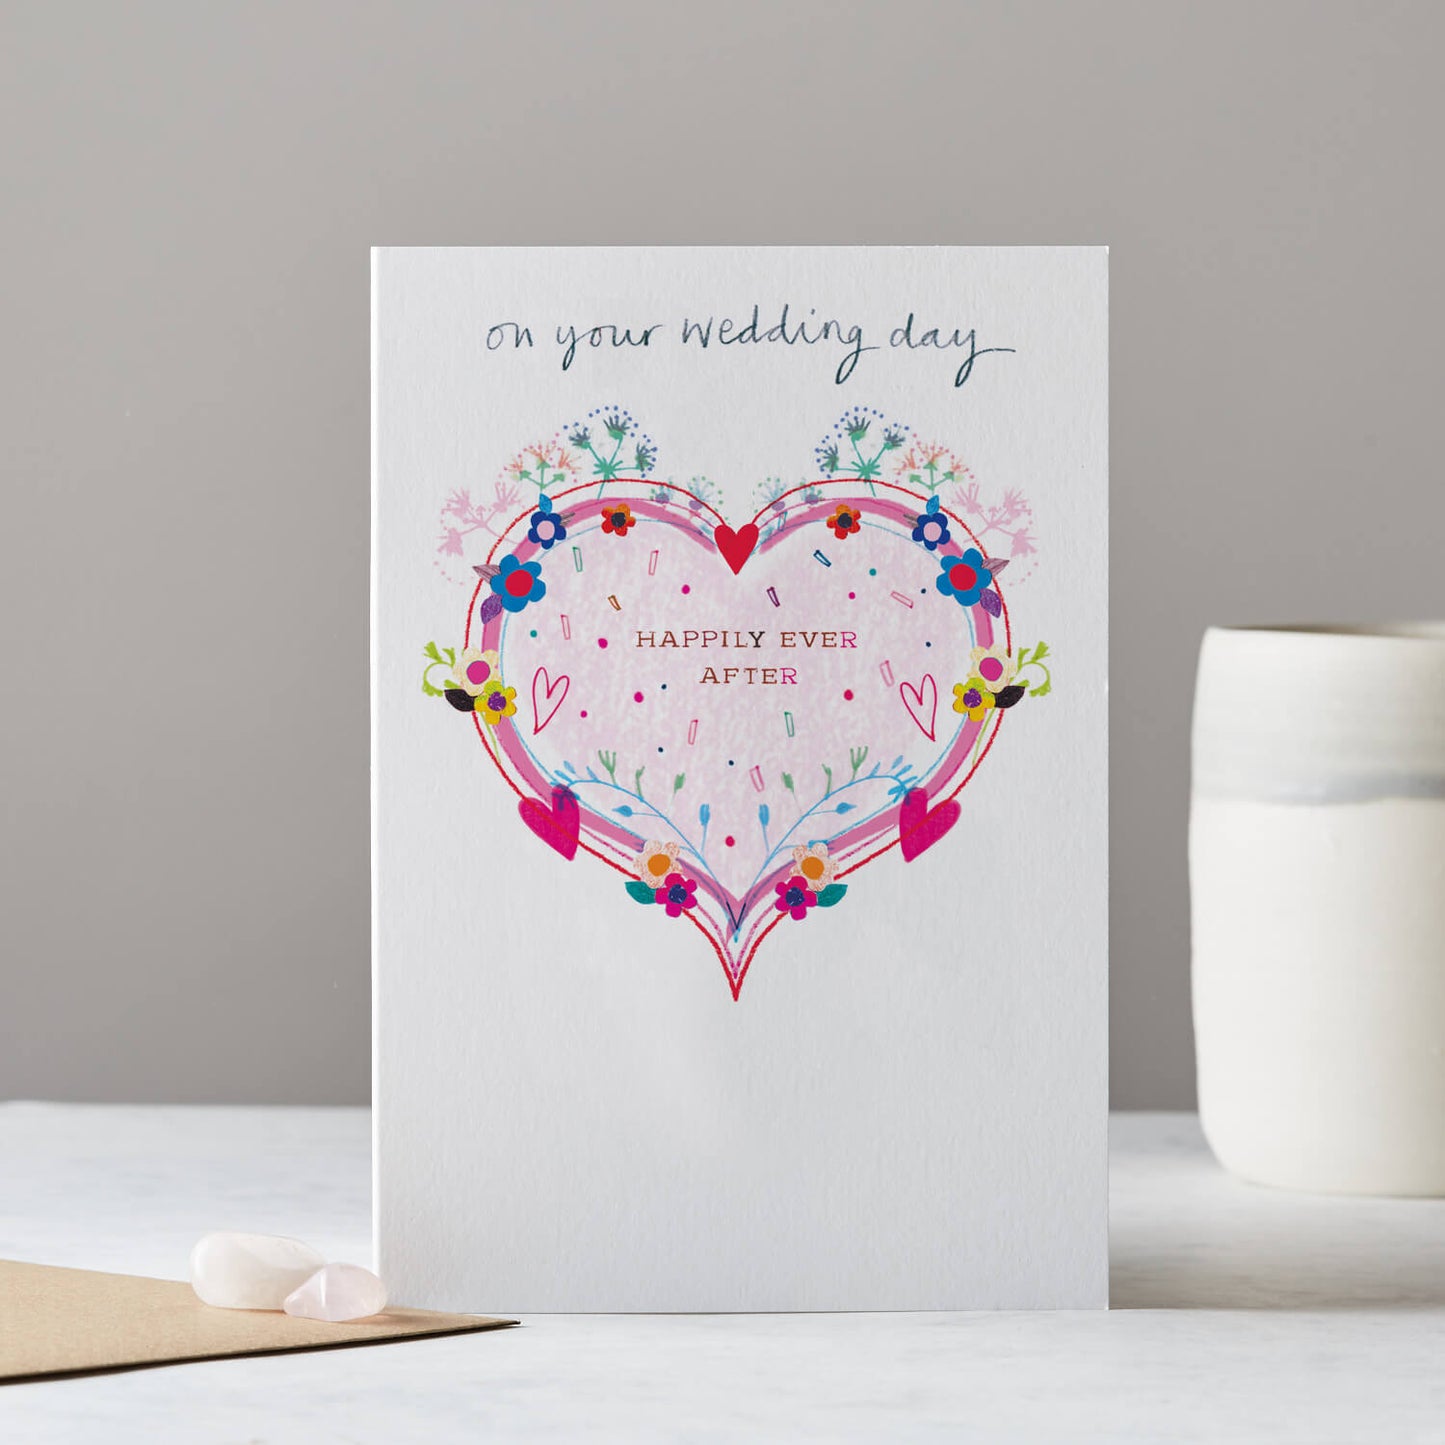 ON YOUR WEDDING DAY, HAPPILY EVER AFTER HEART CARD